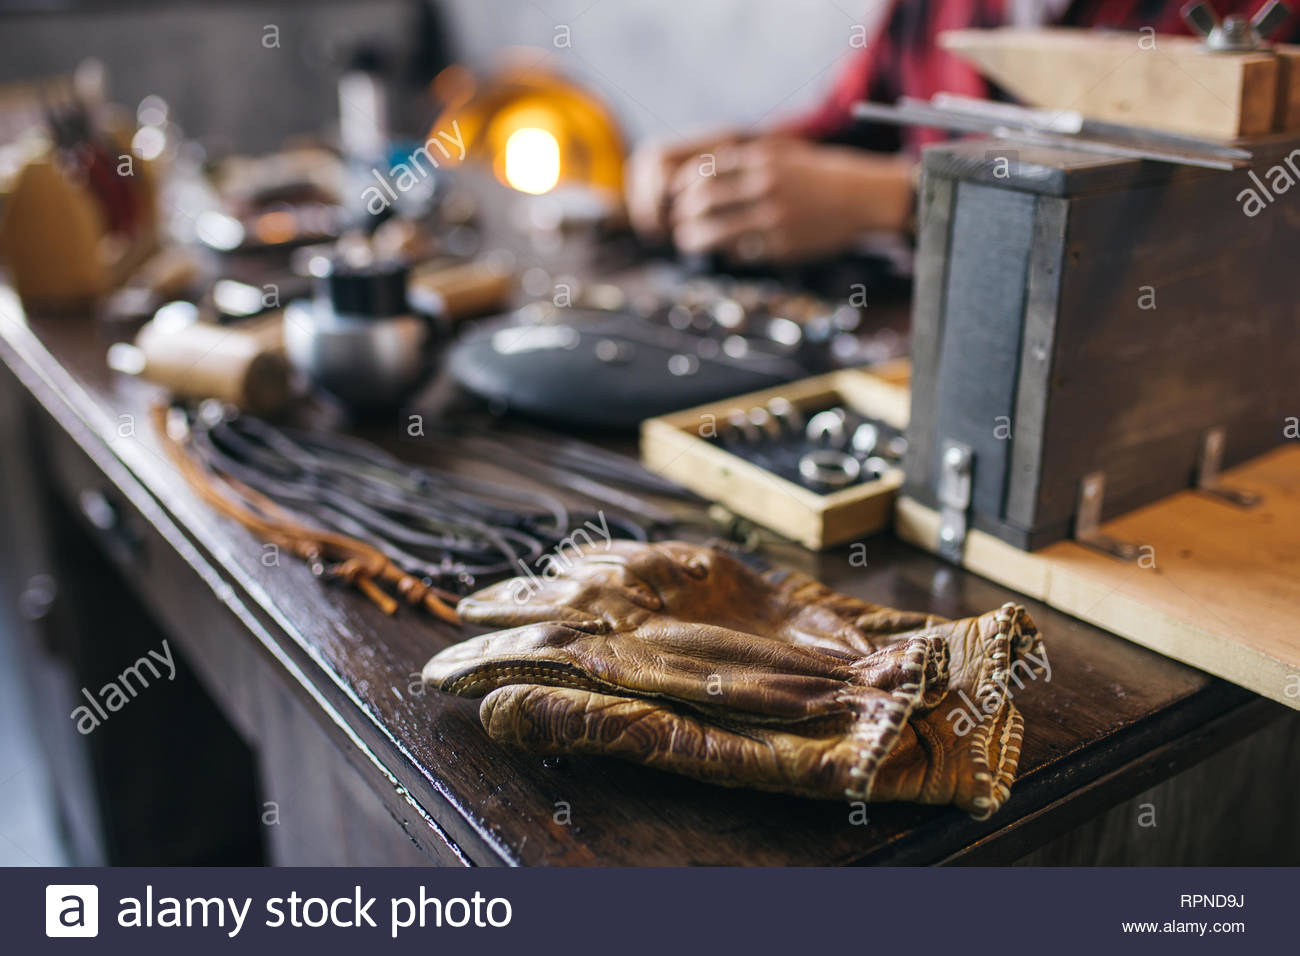 Focus On The Gloves Blurred Image Working Craftsman In